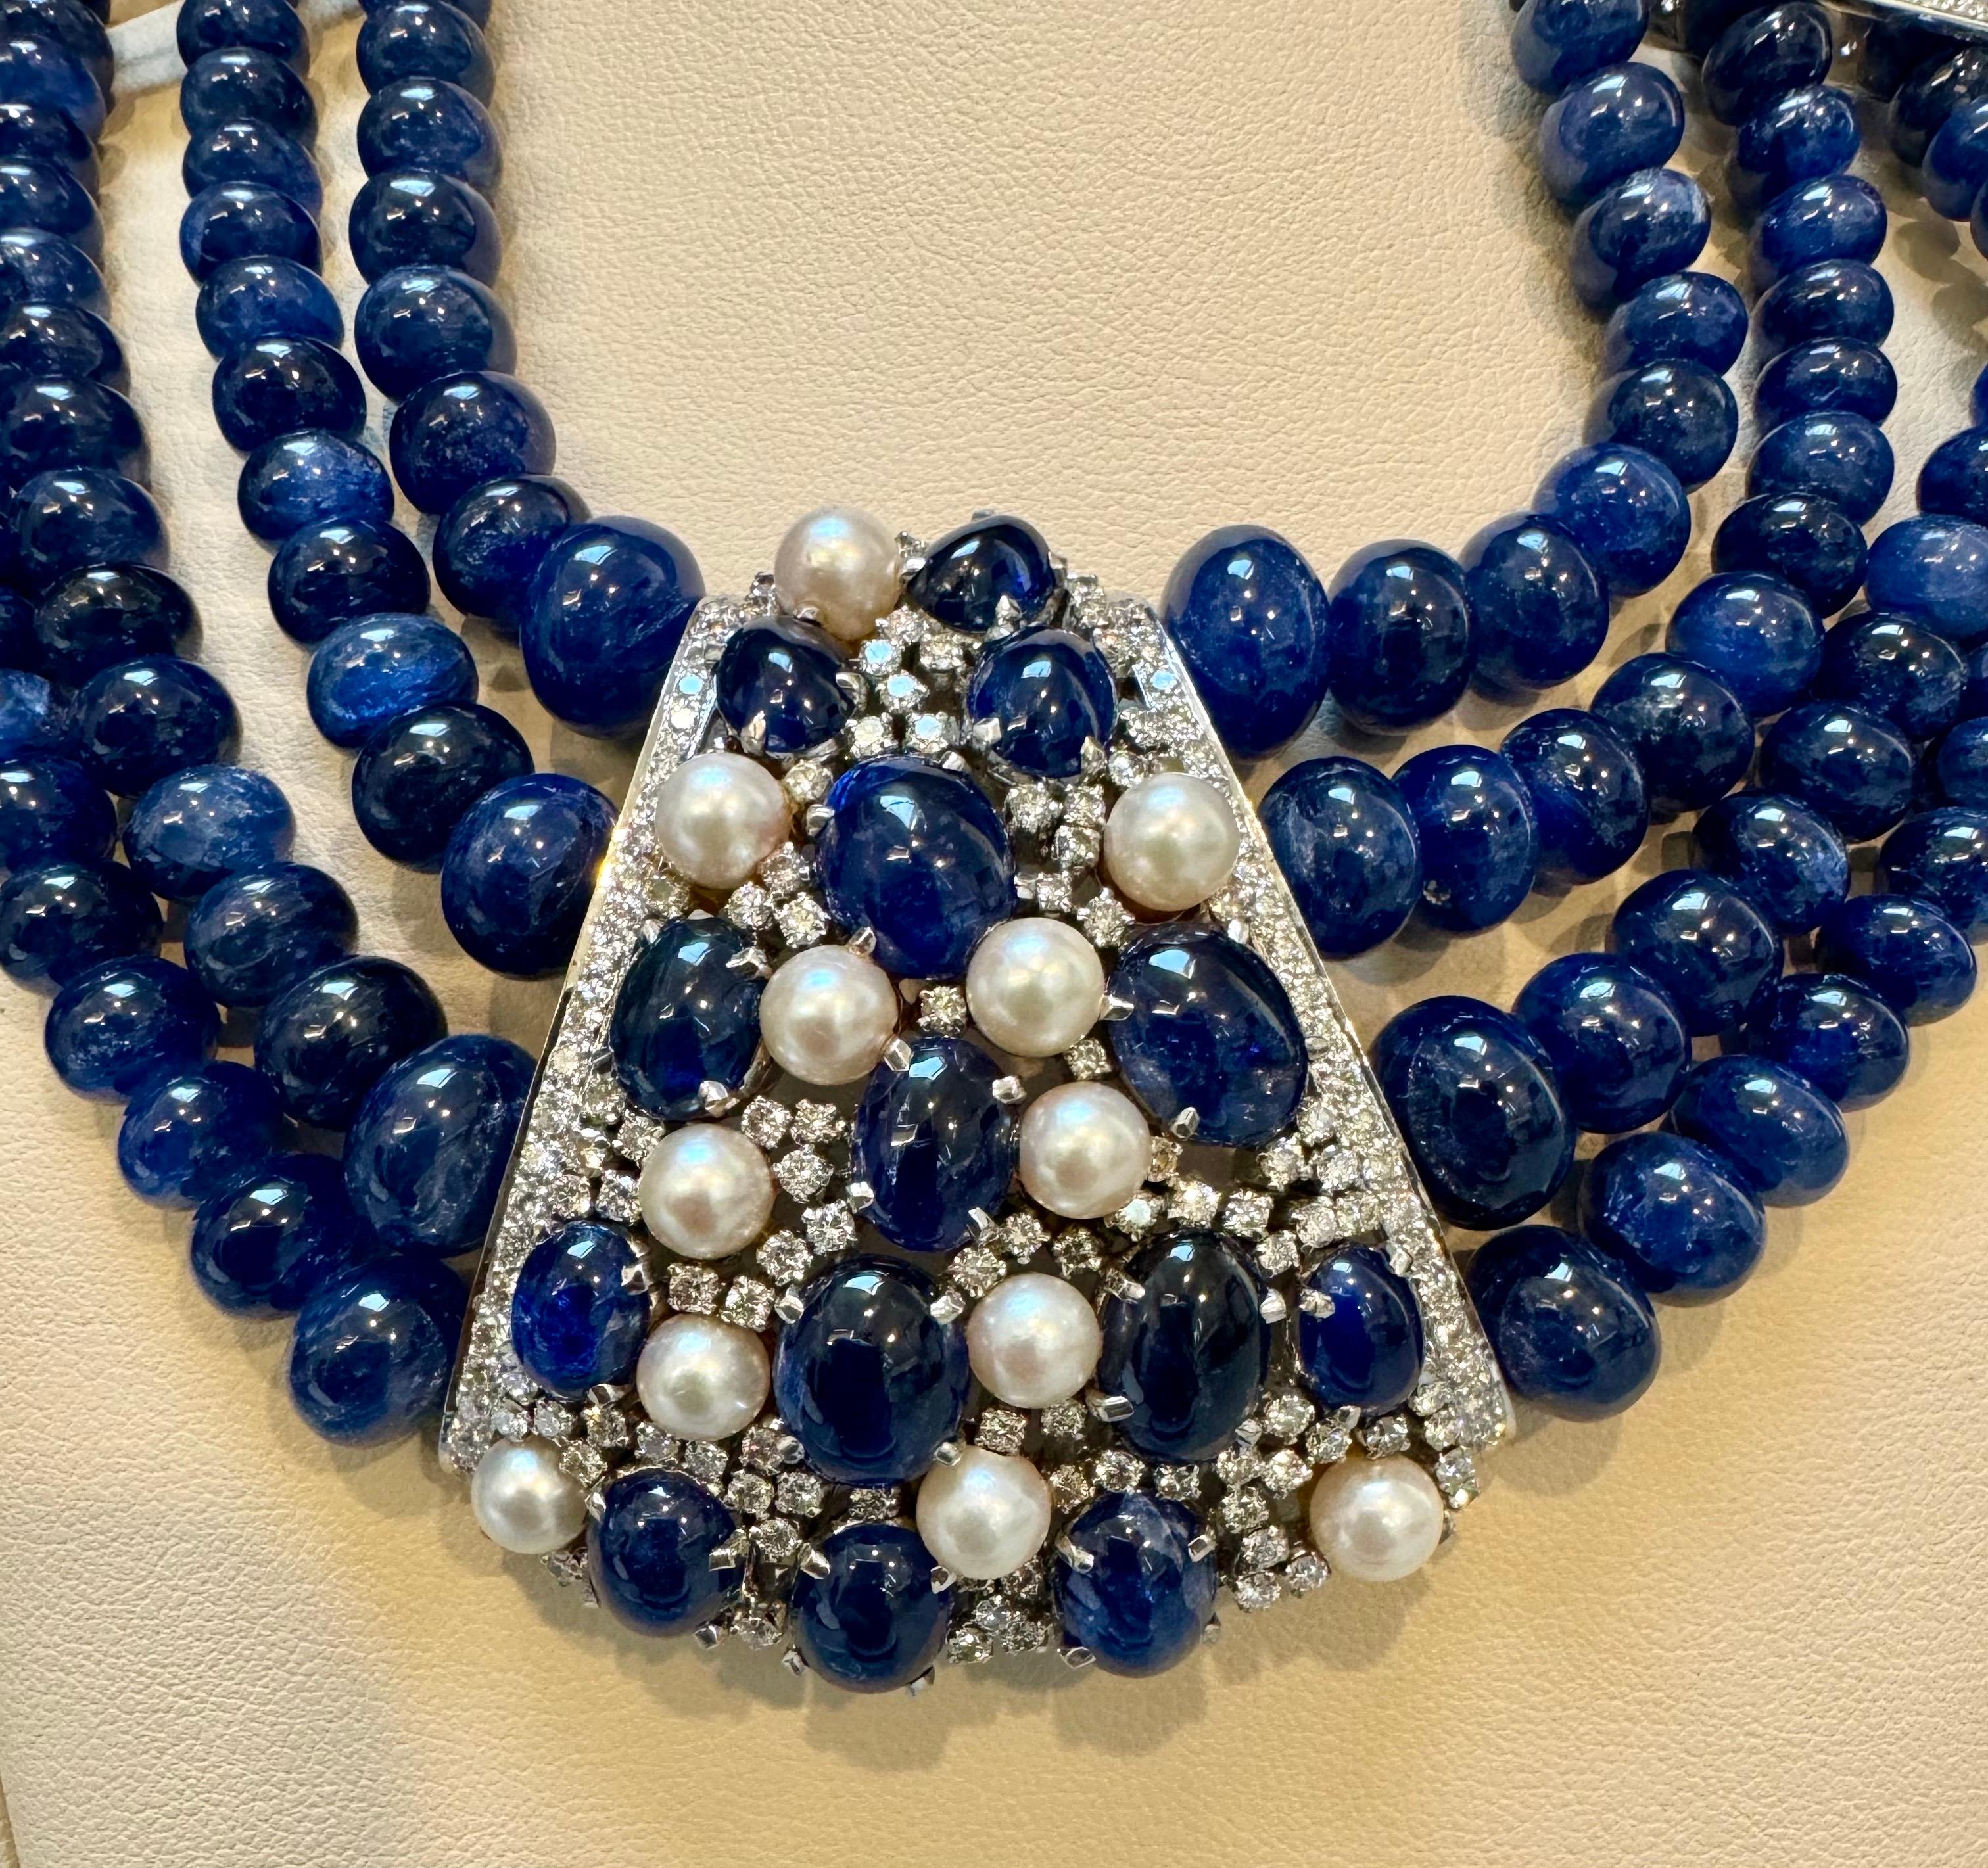 700Ct Sapphire Bead Necklace with cabochon & Diamond Center & Diamond Spacer 18K For Sale 3